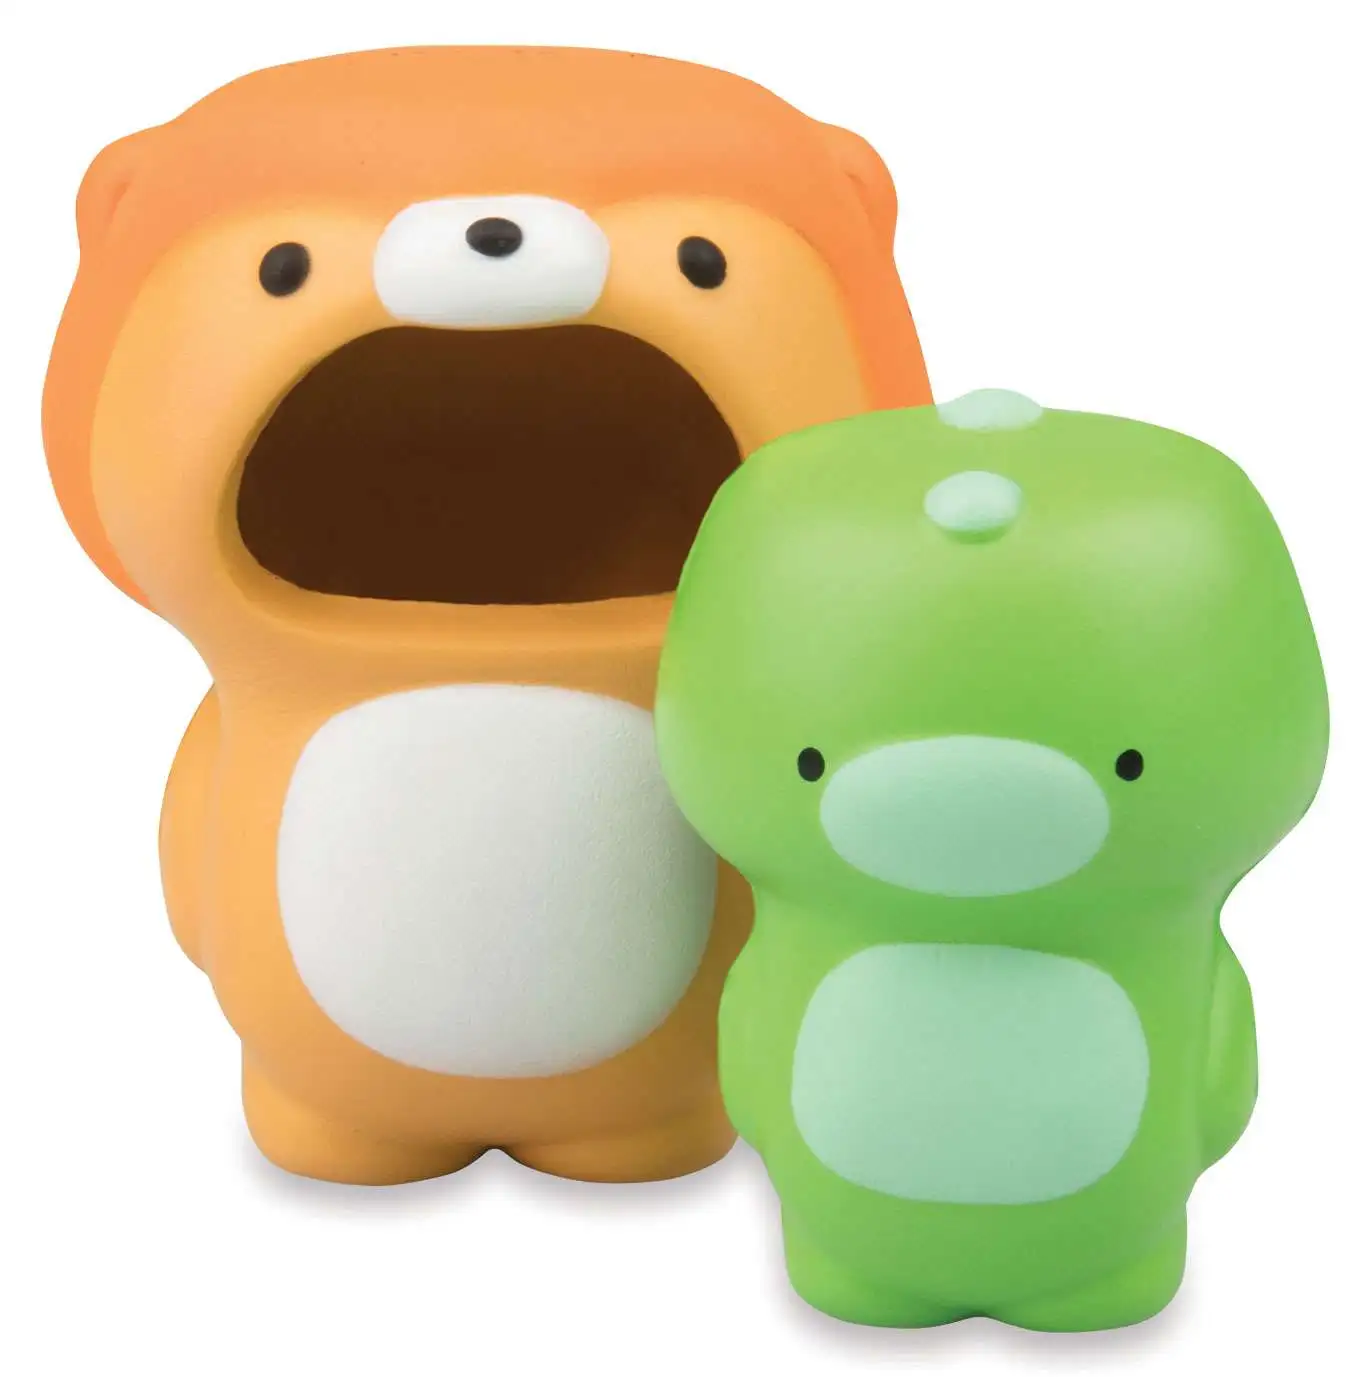 SoftN Slow Squishies Cutiez Squeeze Toy RANDOM Character Orb -